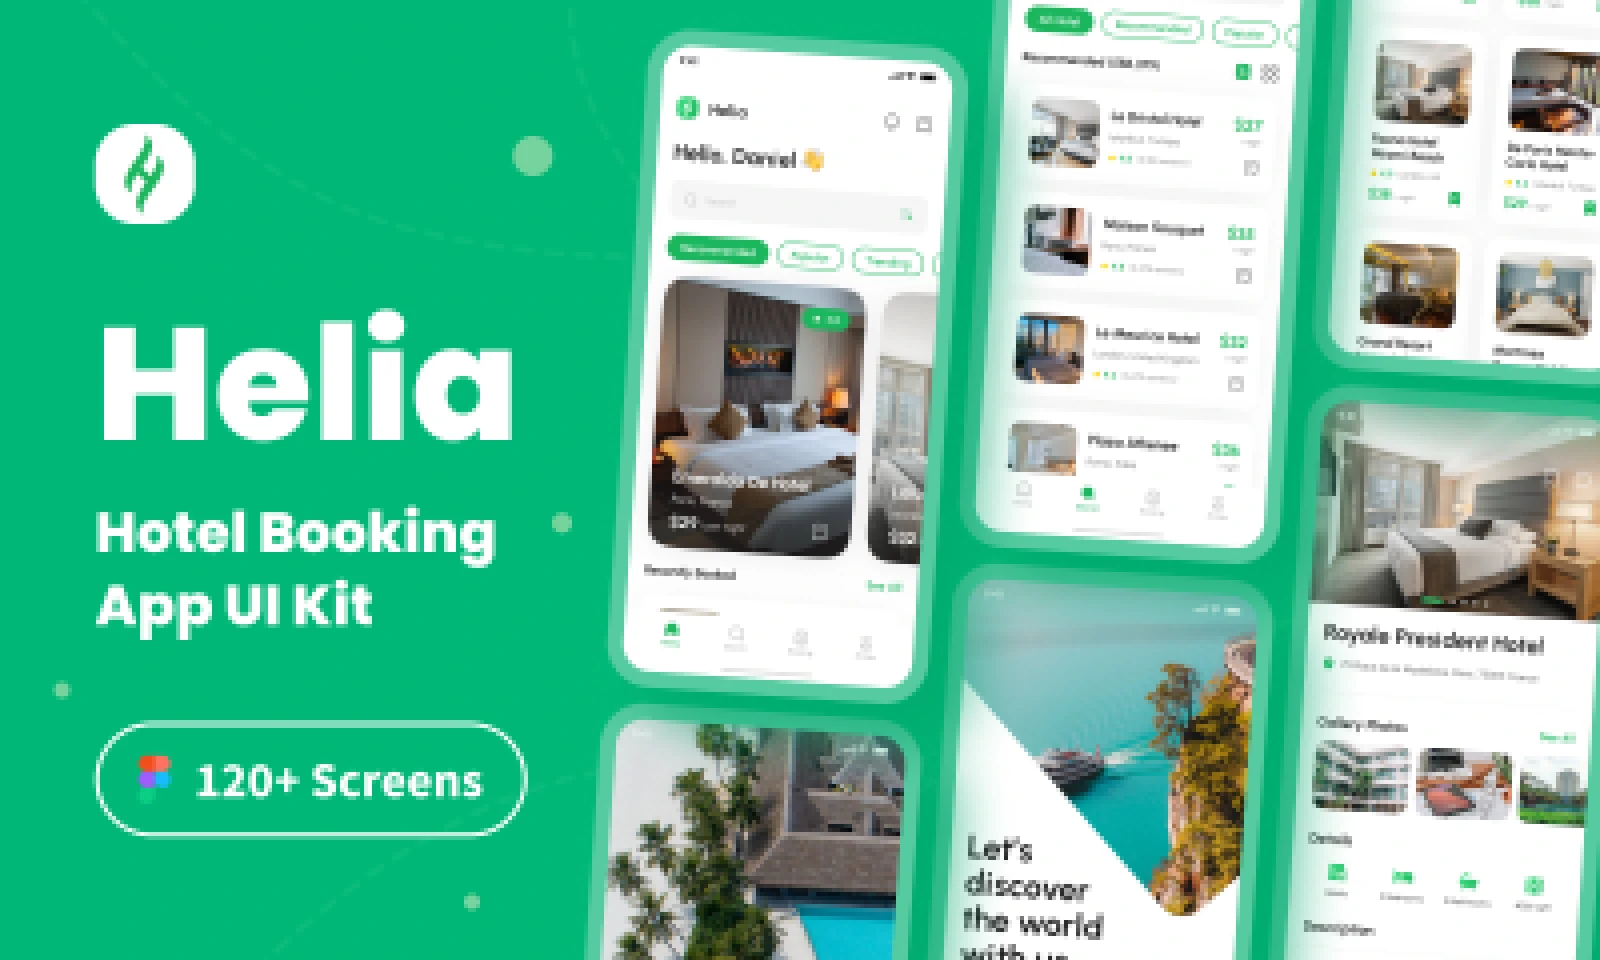 Helia - Hotel Booking App UI Kit for Figma and Adobe XD